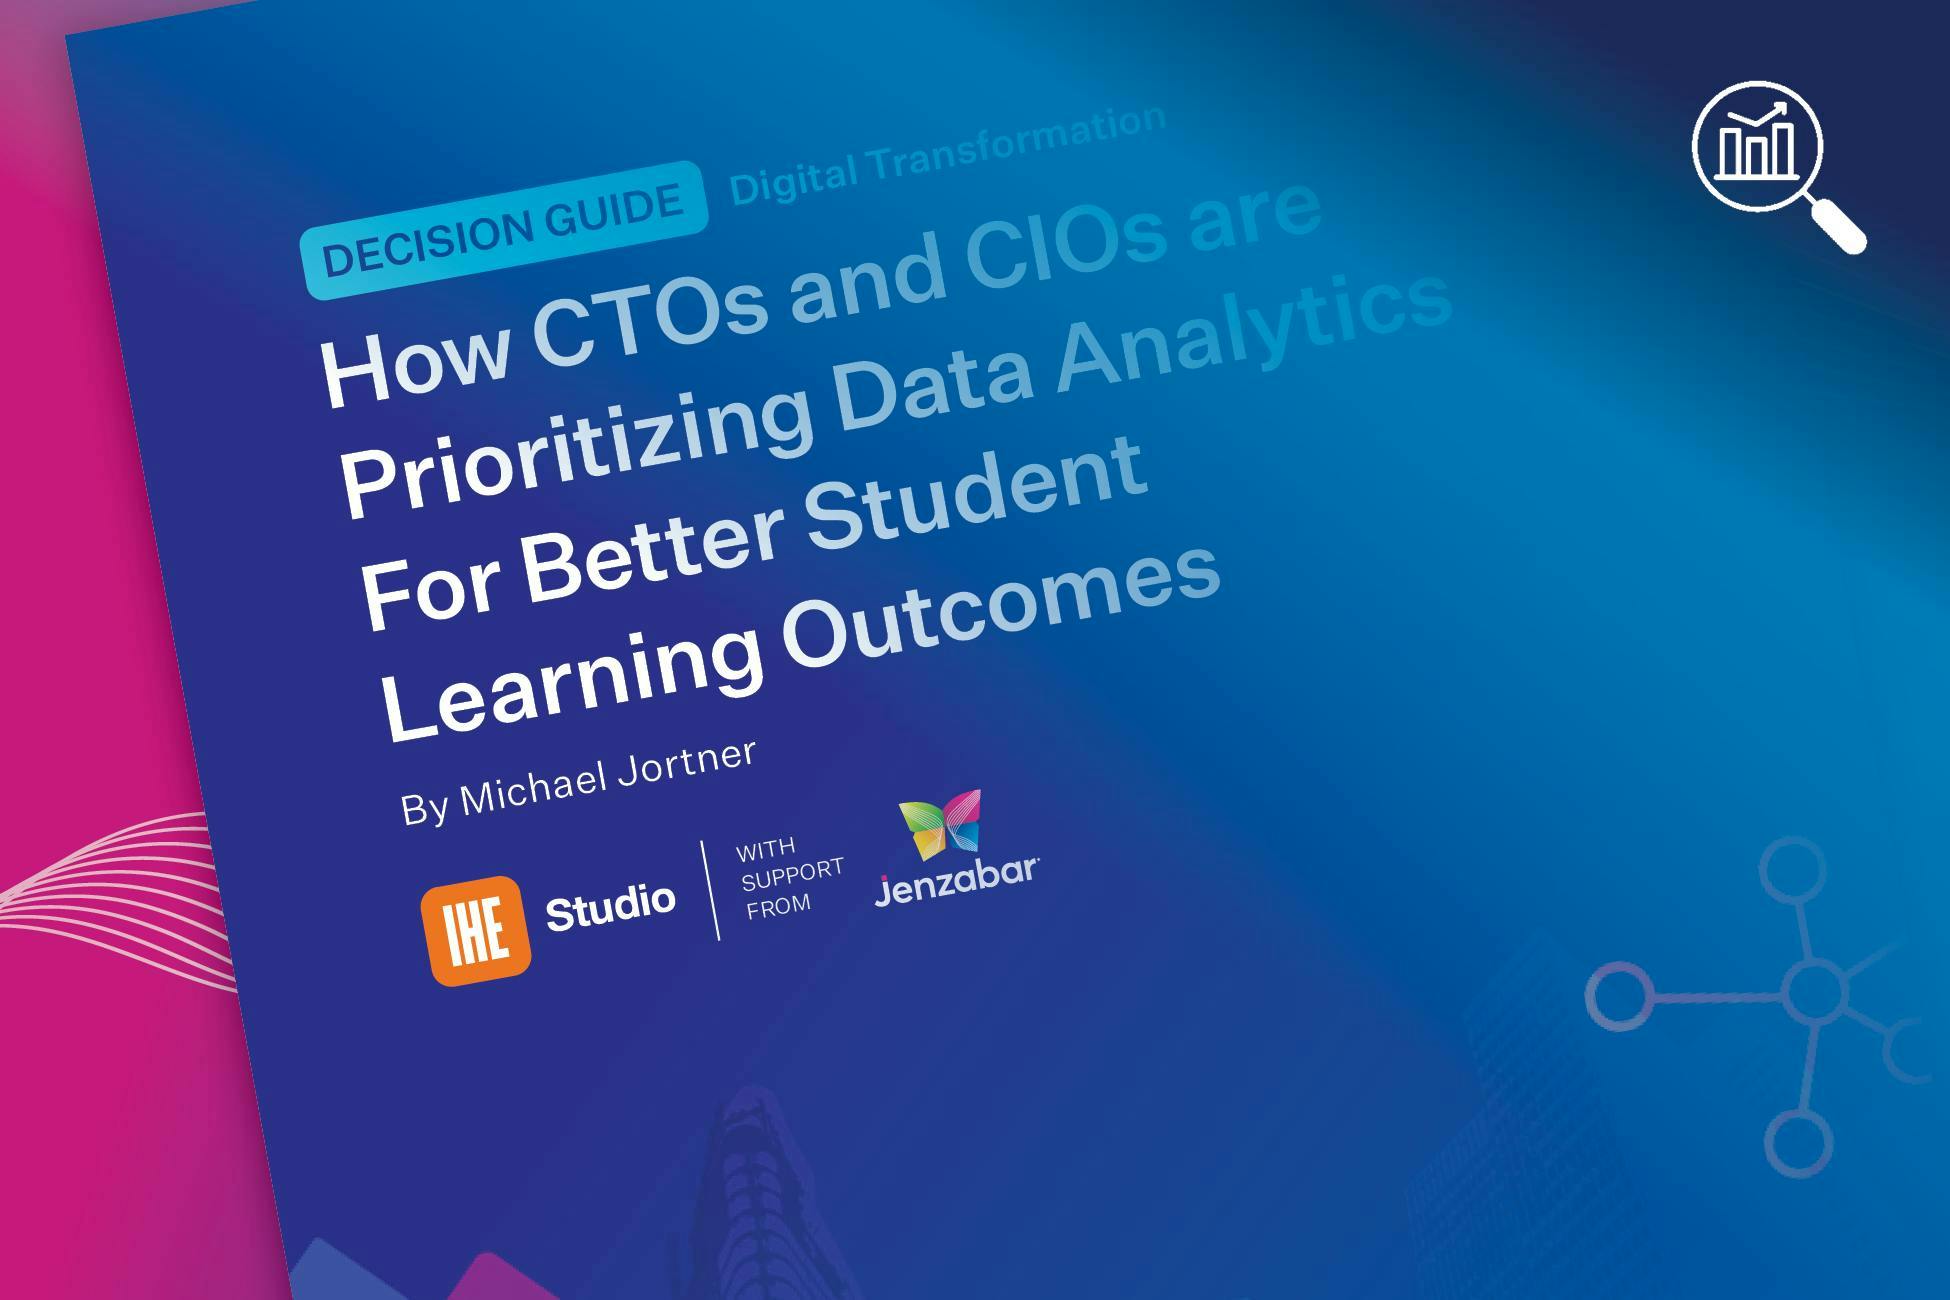 Decision Guide: How CTOs and CIOs Are Prioritizing Data Analytics for Better Student Learning Outcomes